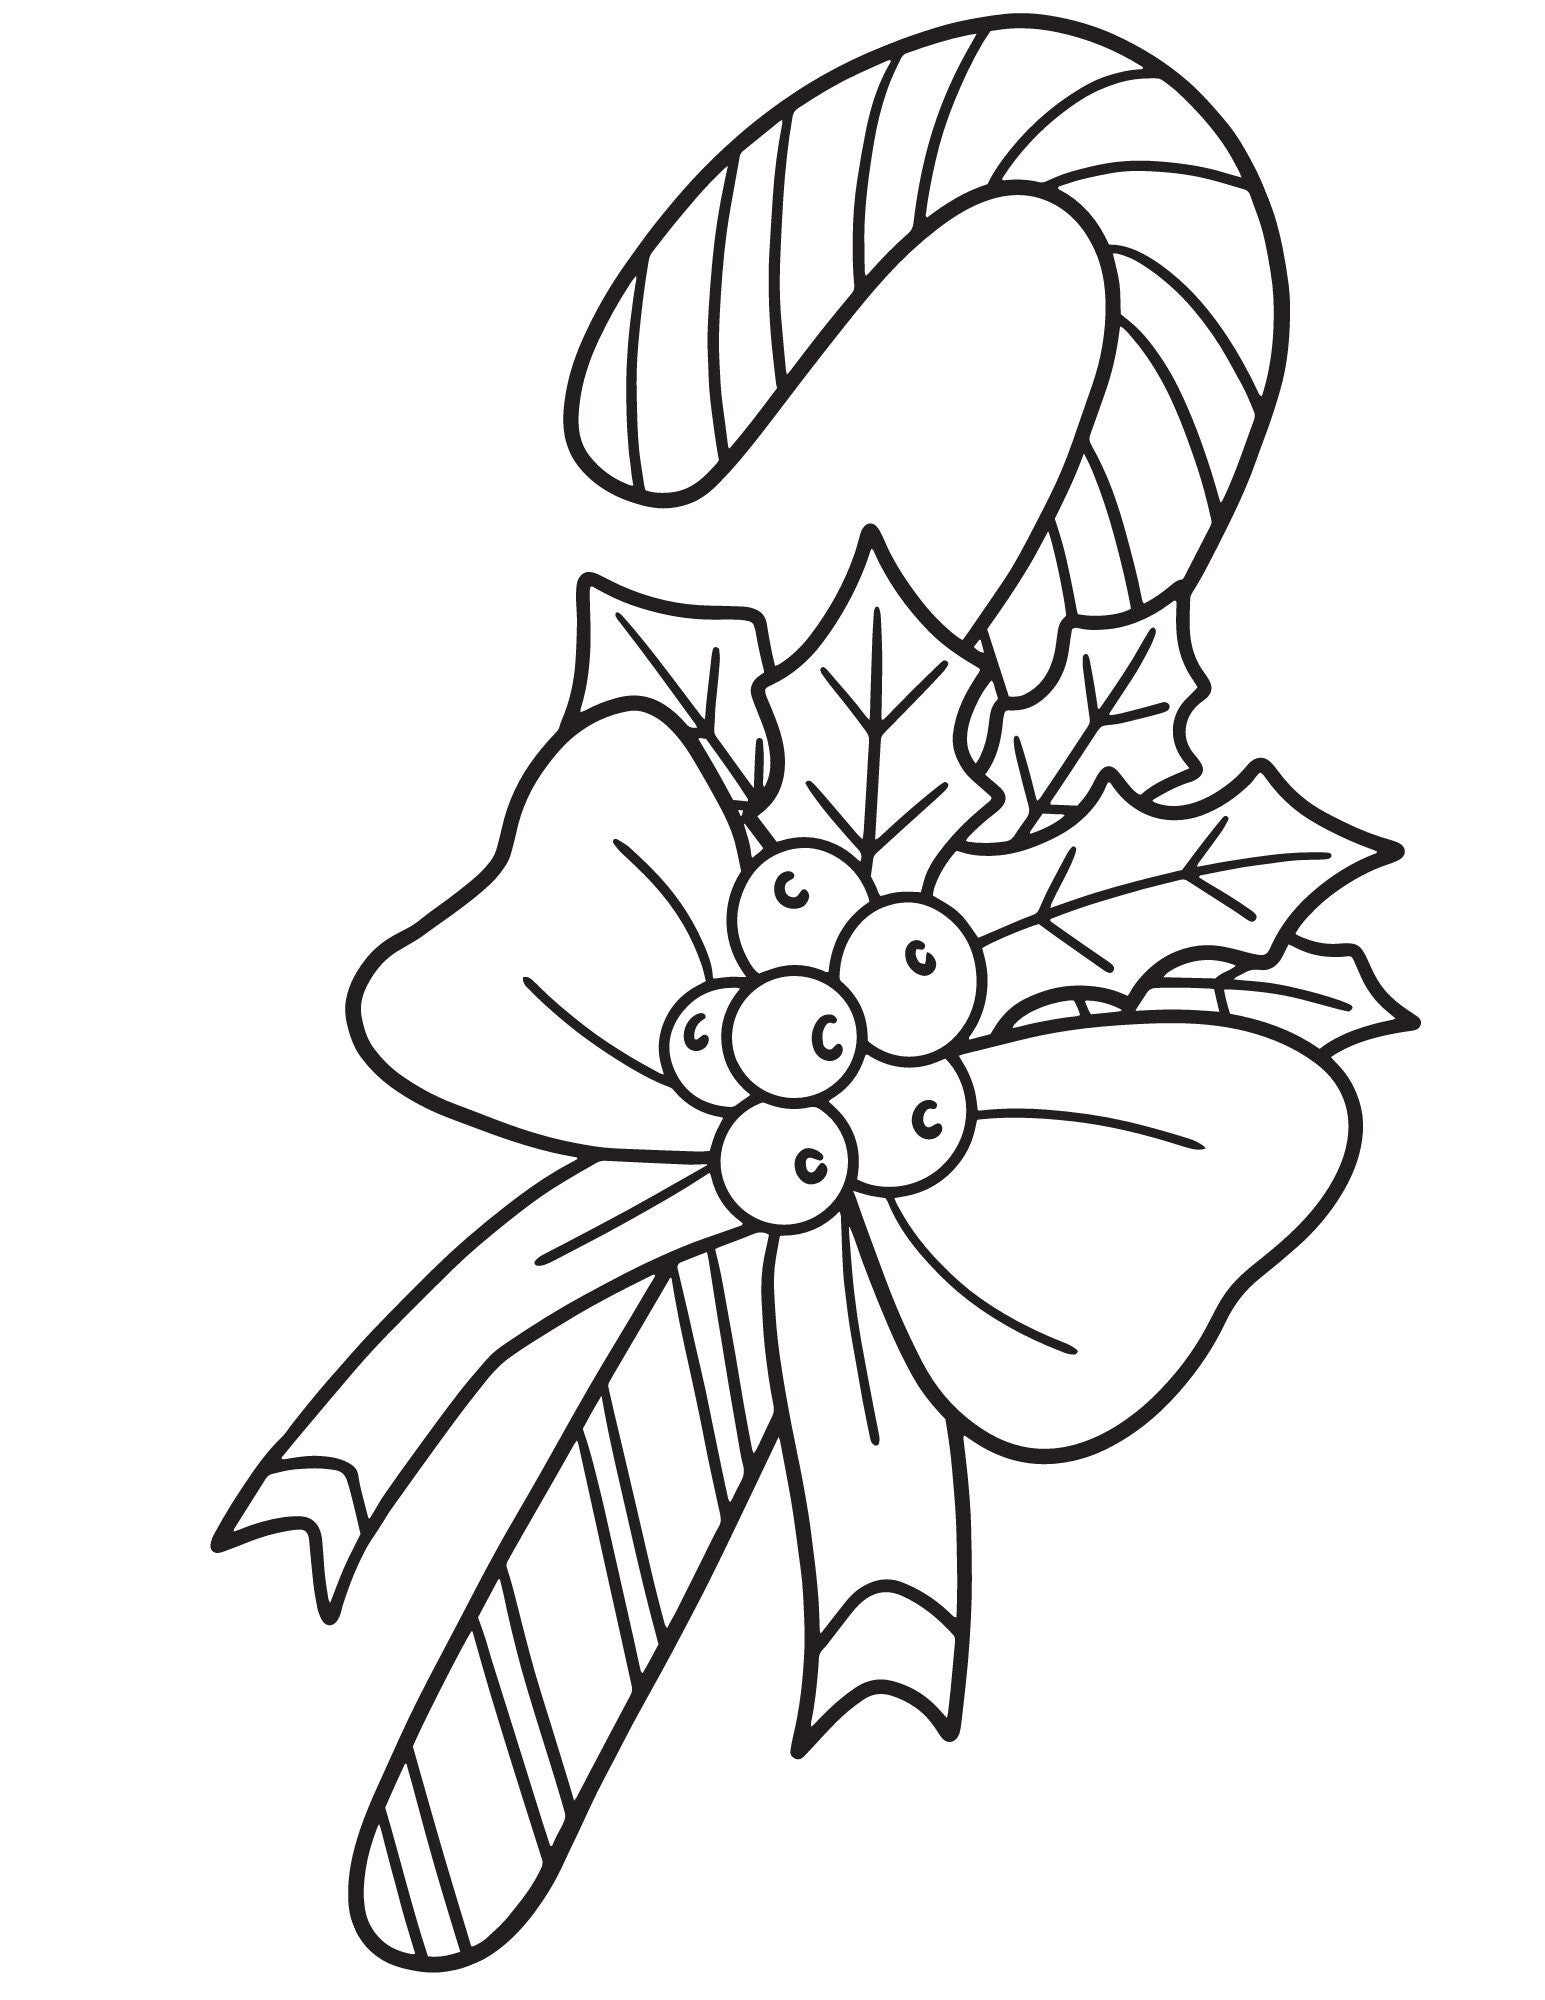 Christmas candy cane coloring page